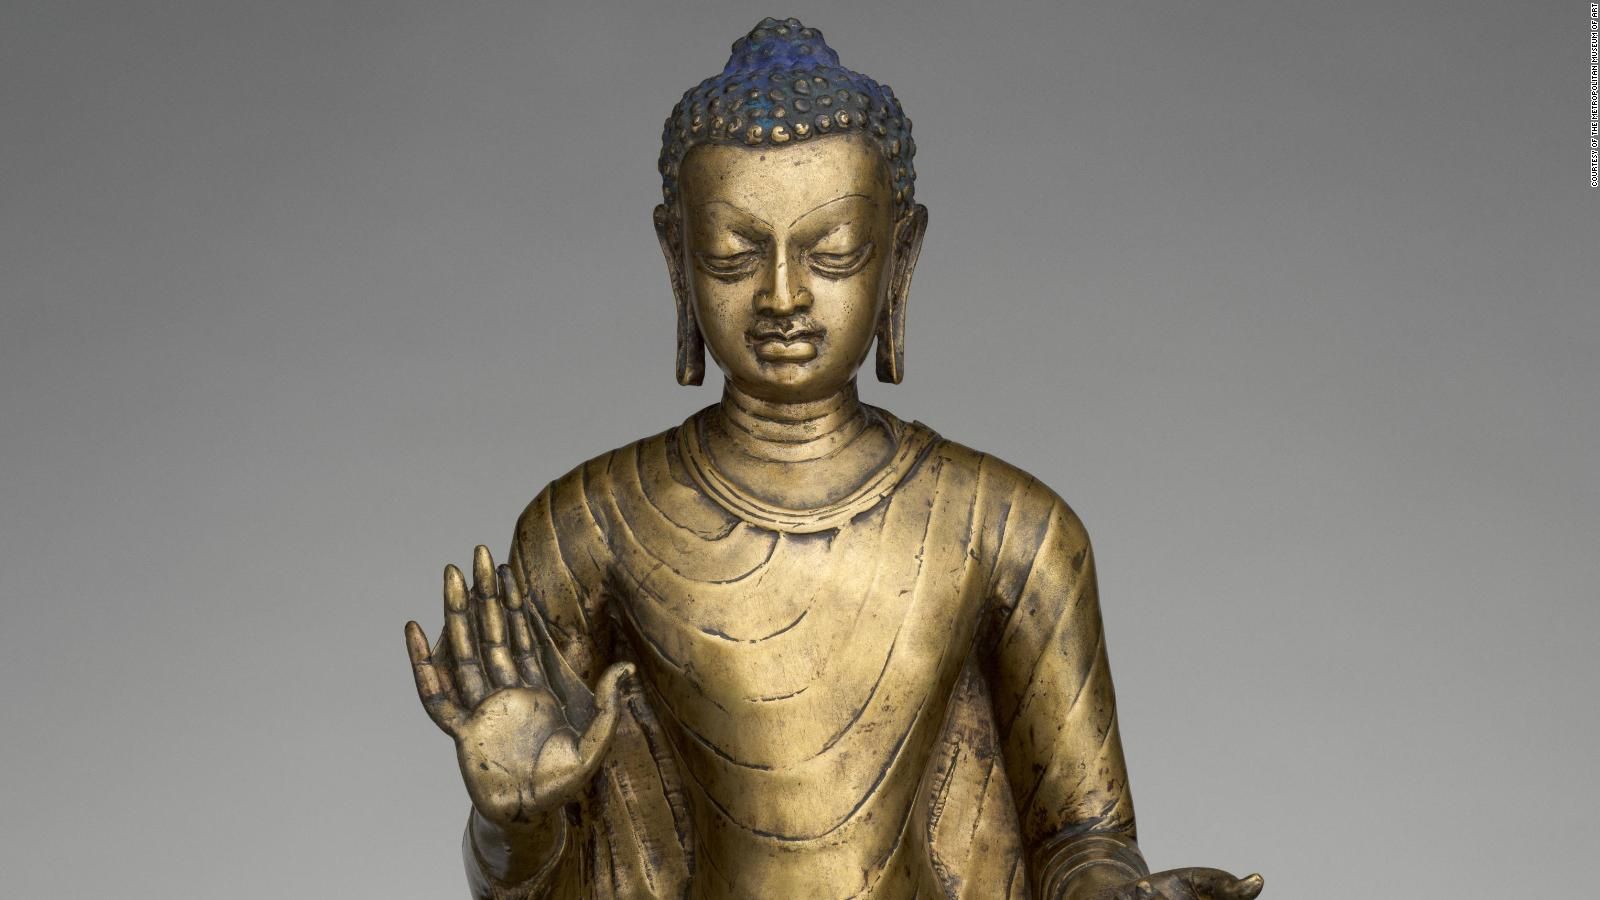 Buddhist art: These ancient image are more timely than you think